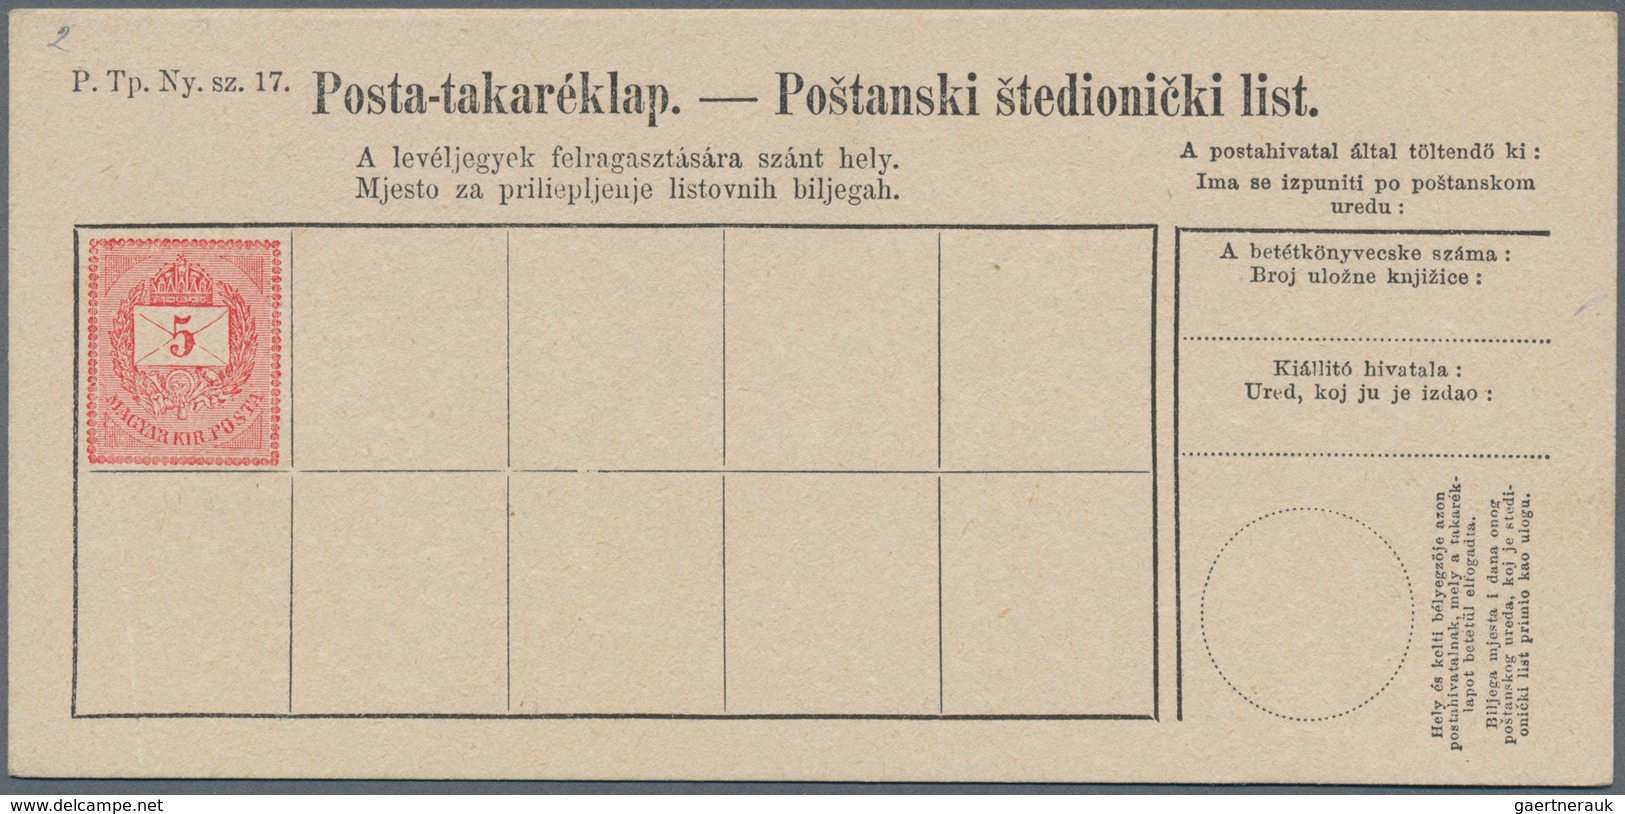 Ungarn - Ganzsachen: 1886/1916, 7 different postal stationery post savings cards 5 f, 10 f red, 10 f